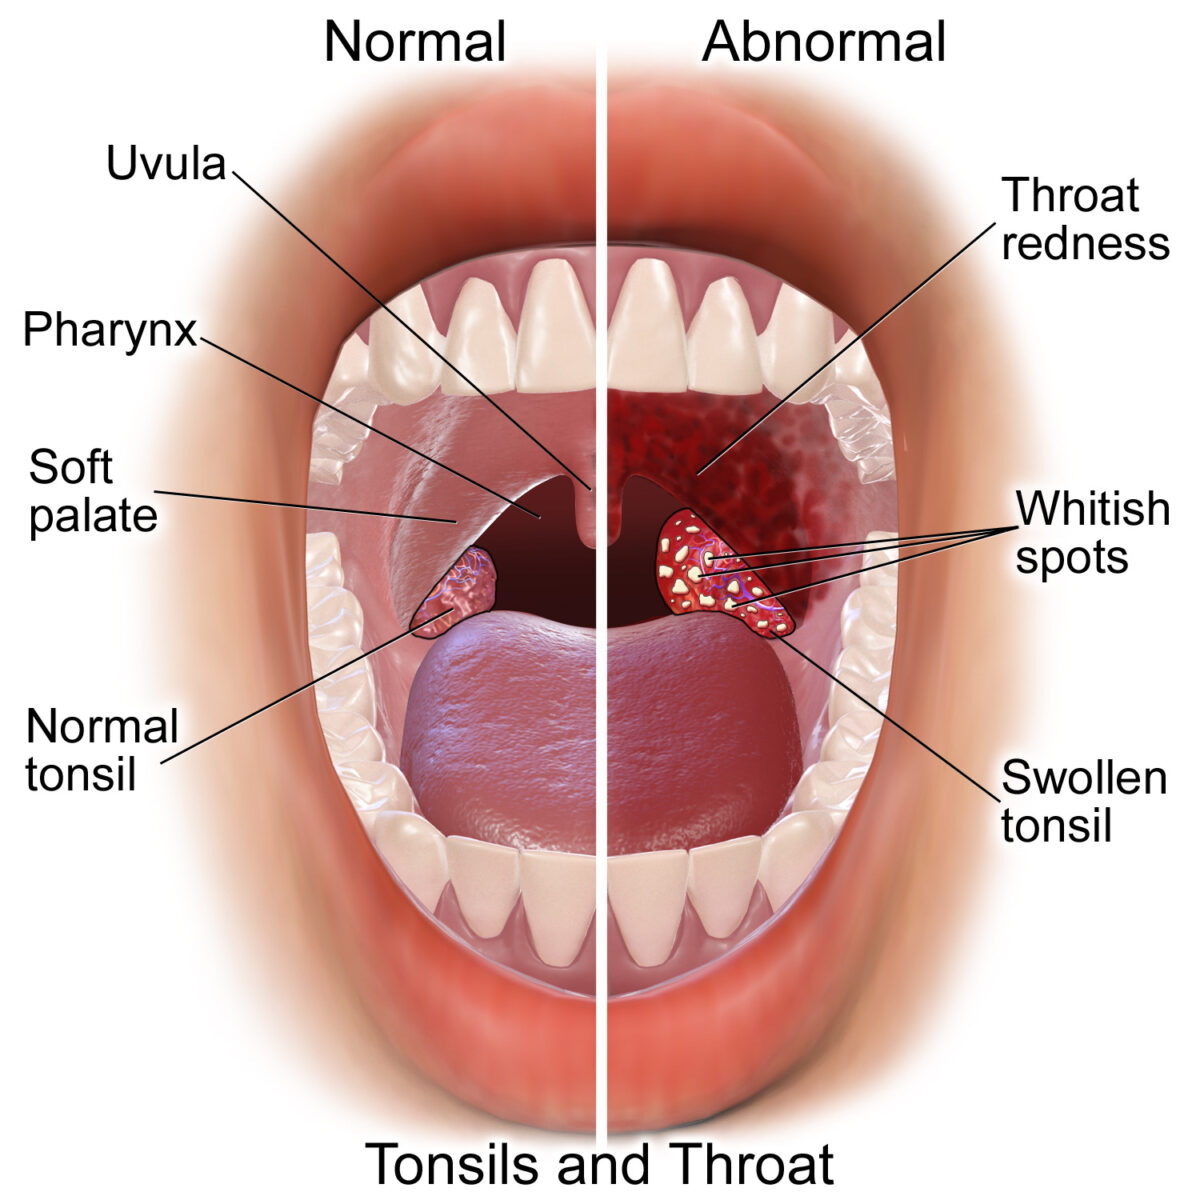 Comparison normal oropharynx and acute tonsillitis